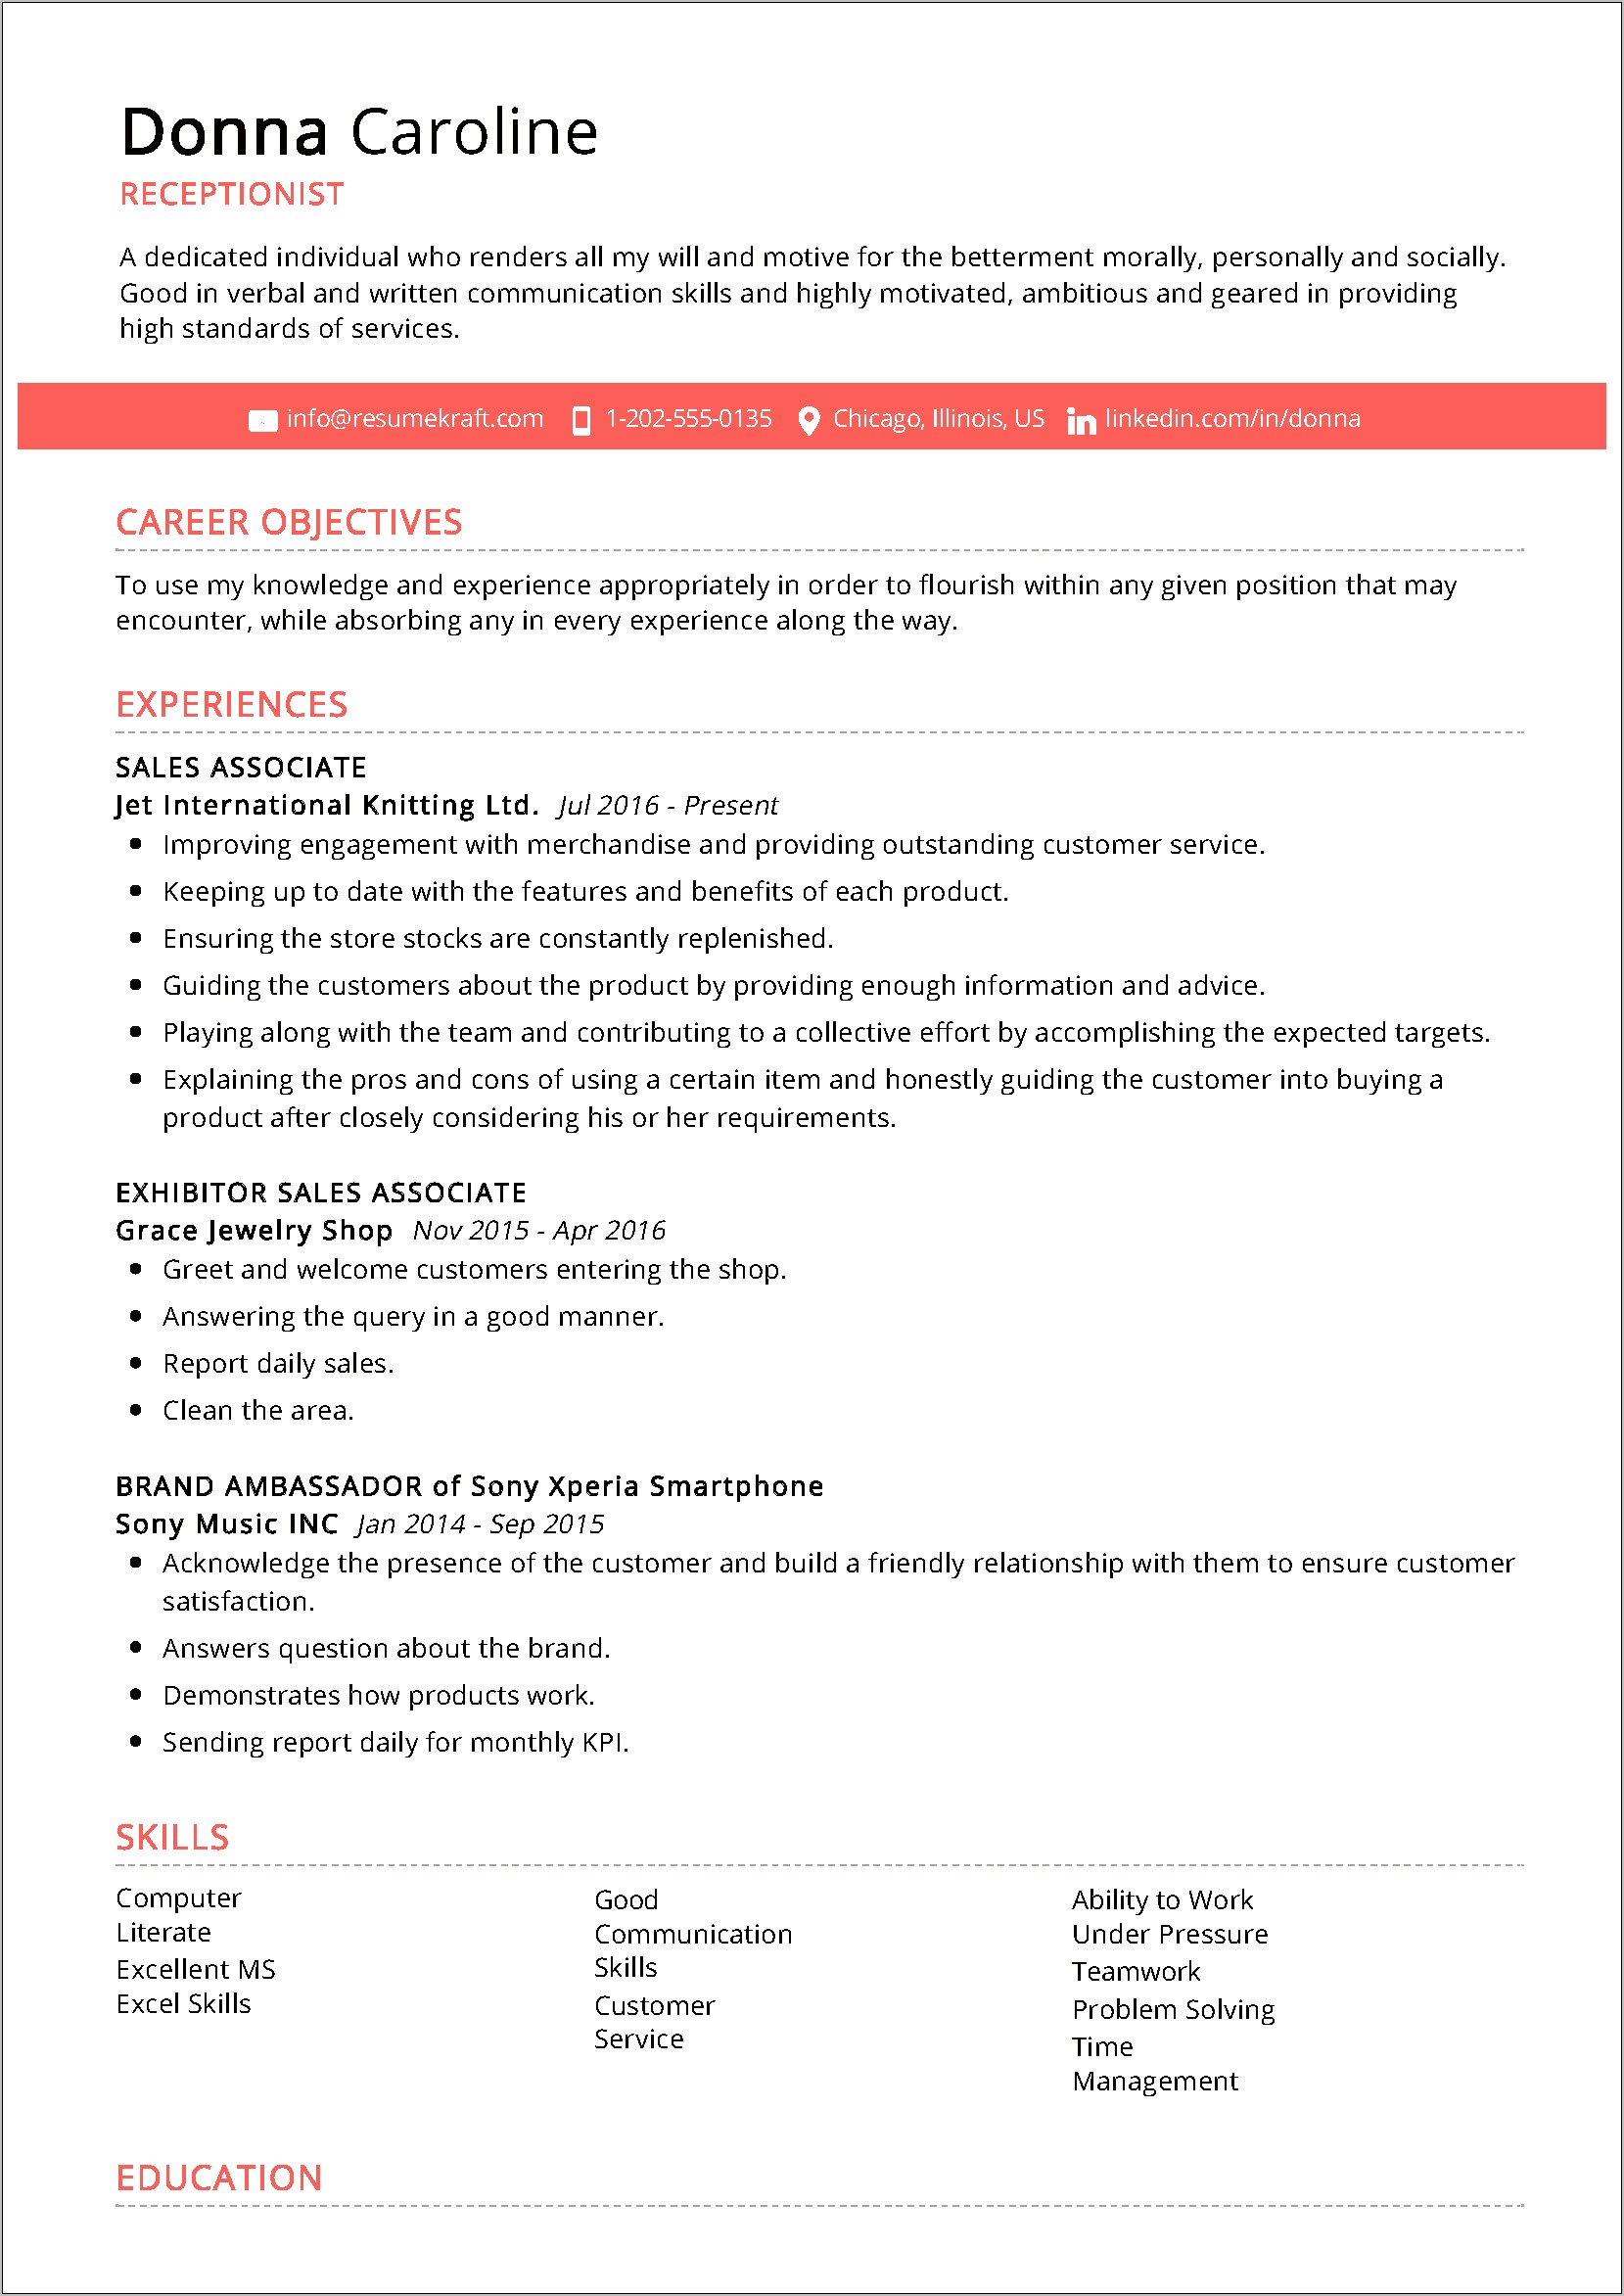 Resume Objective For Receptionist Position